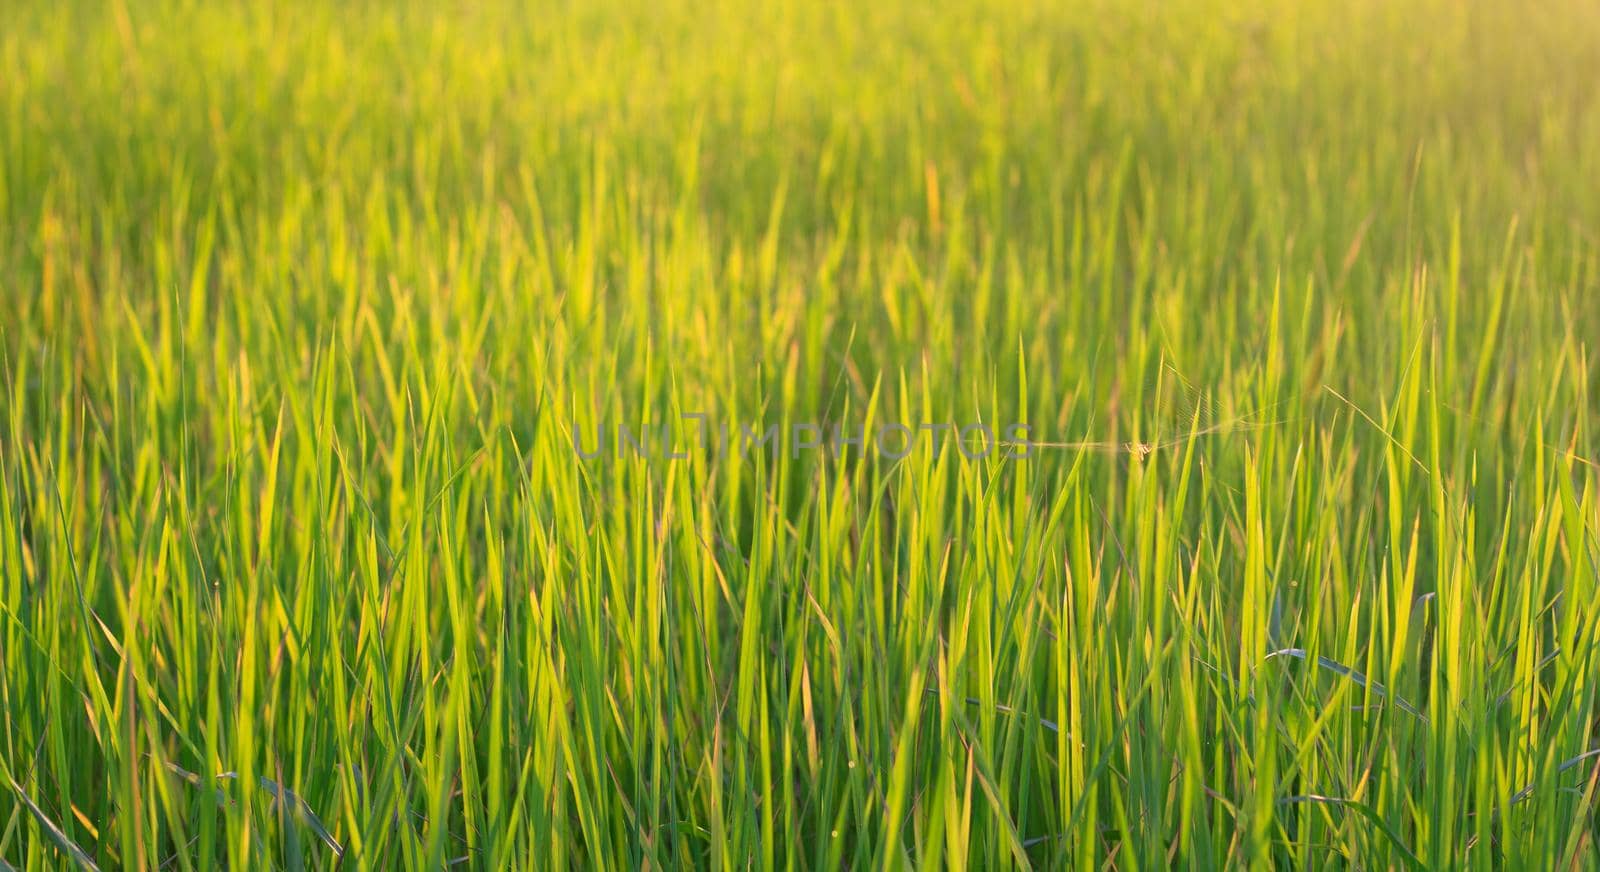 Rice field in the morning with the sun shining through.